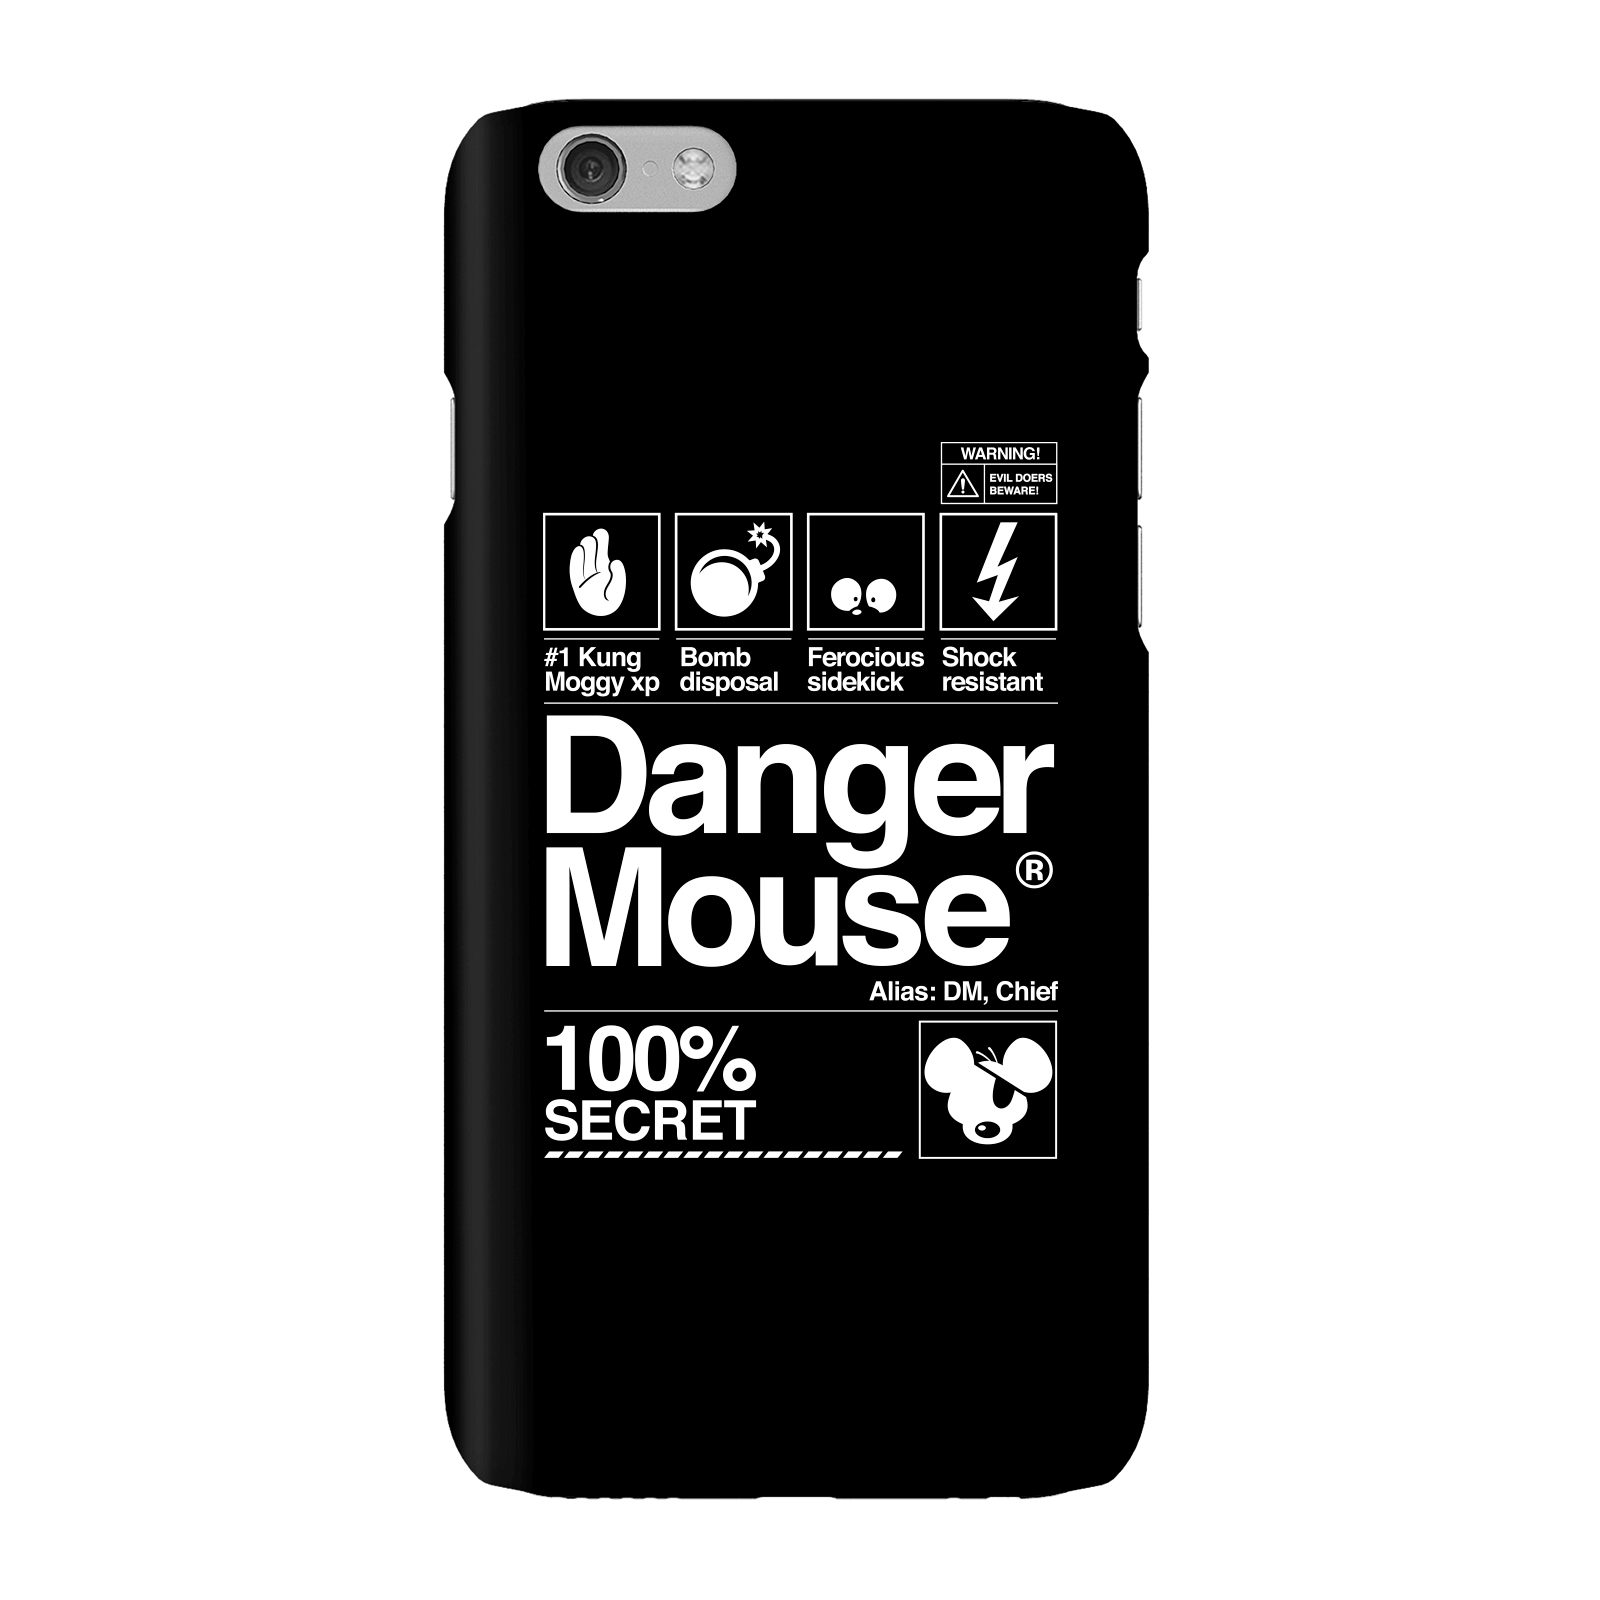 Danger Mouse 100% Secret Phone Case for iPhone and Android - iPhone 6 - Snap Case - Gloss